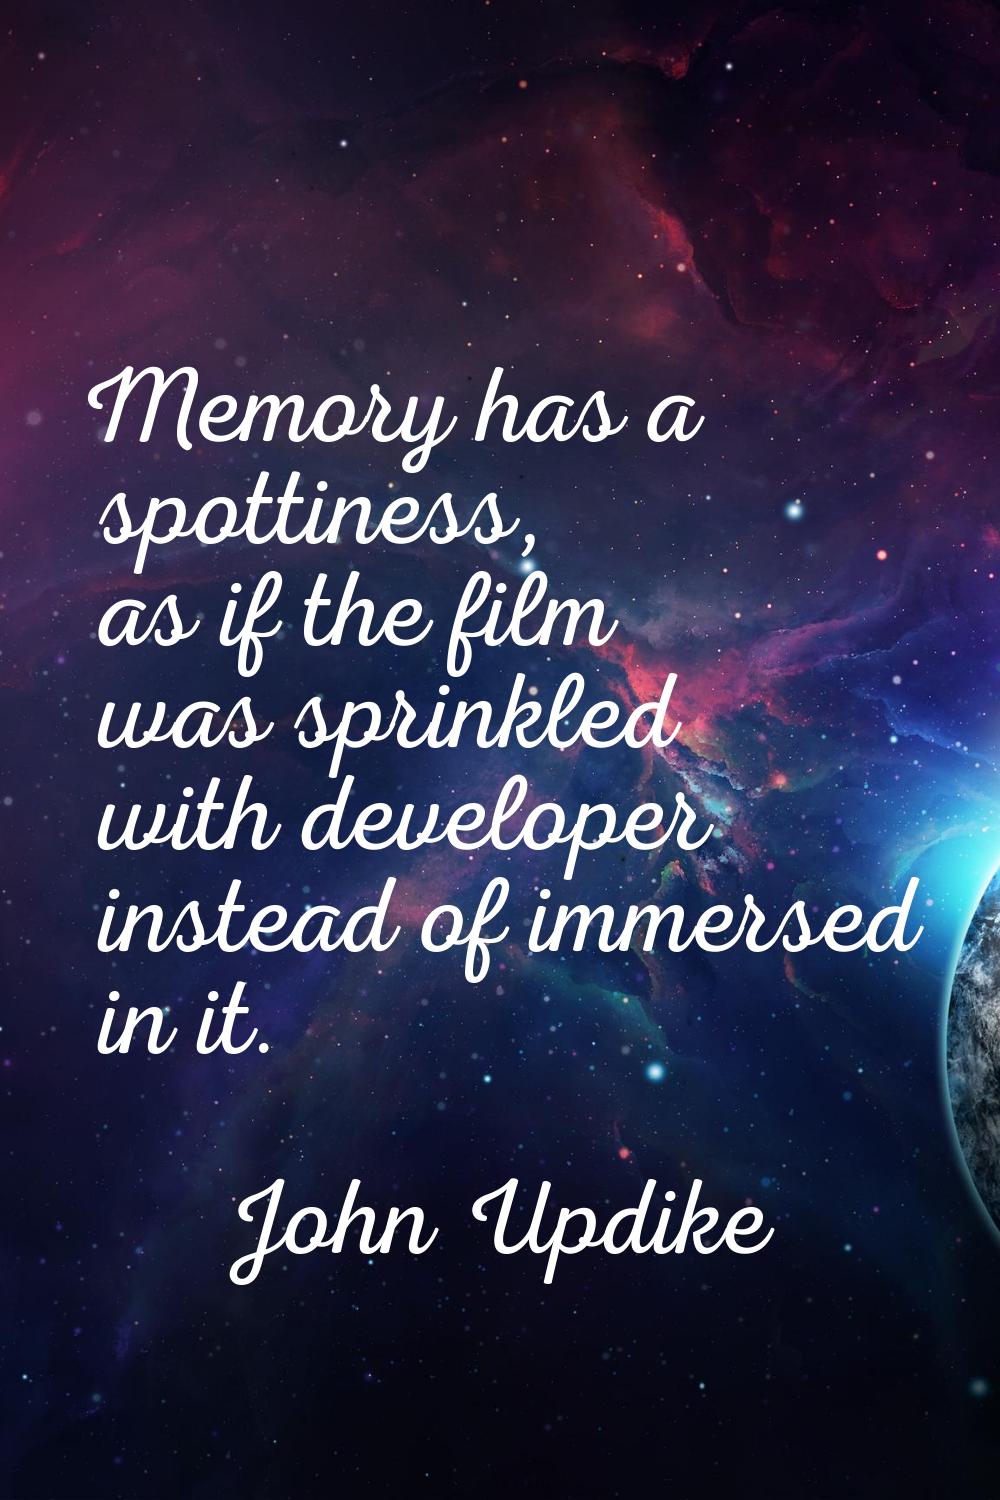 Memory has a spottiness, as if the film was sprinkled with developer instead of immersed in it.